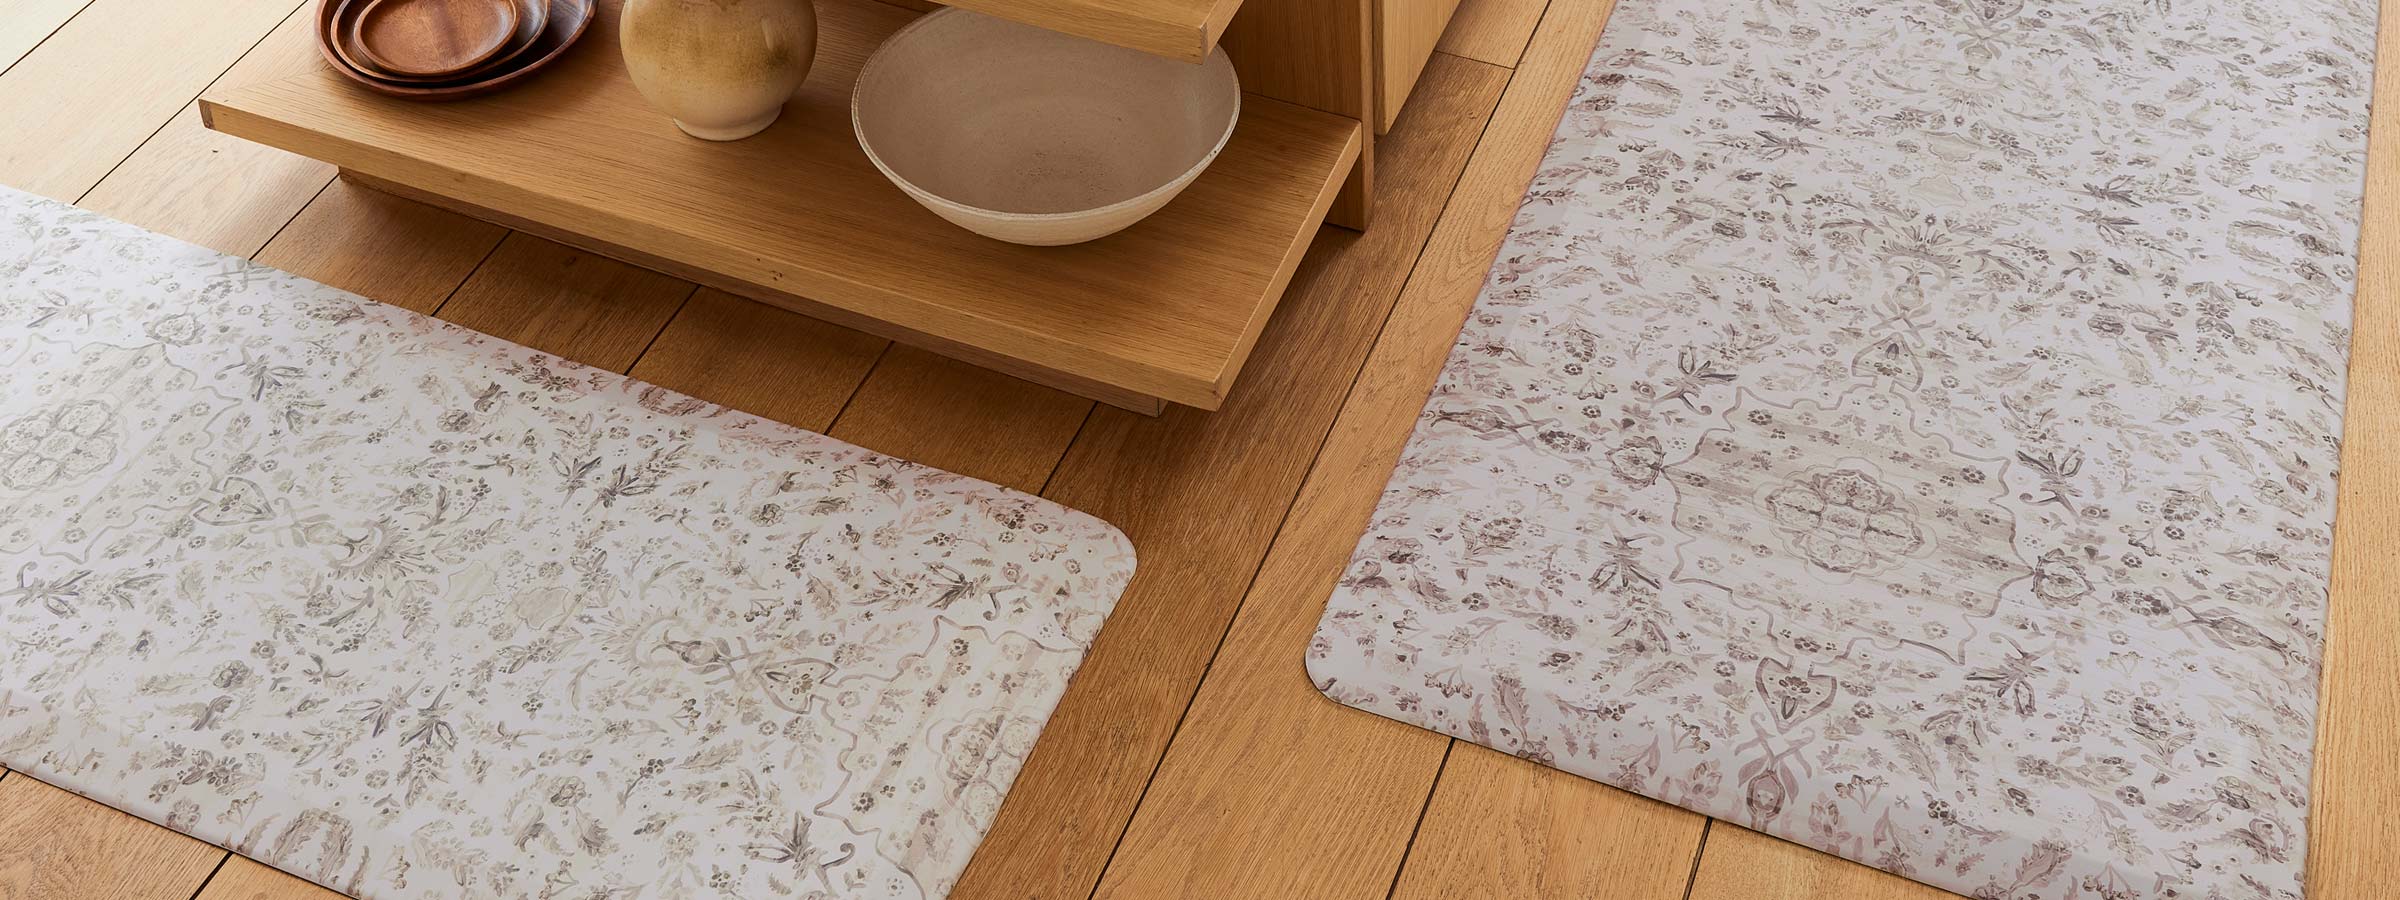 Emile latte neutral floral kitchen mat in size 30x108 shown with womans feet in kitchen